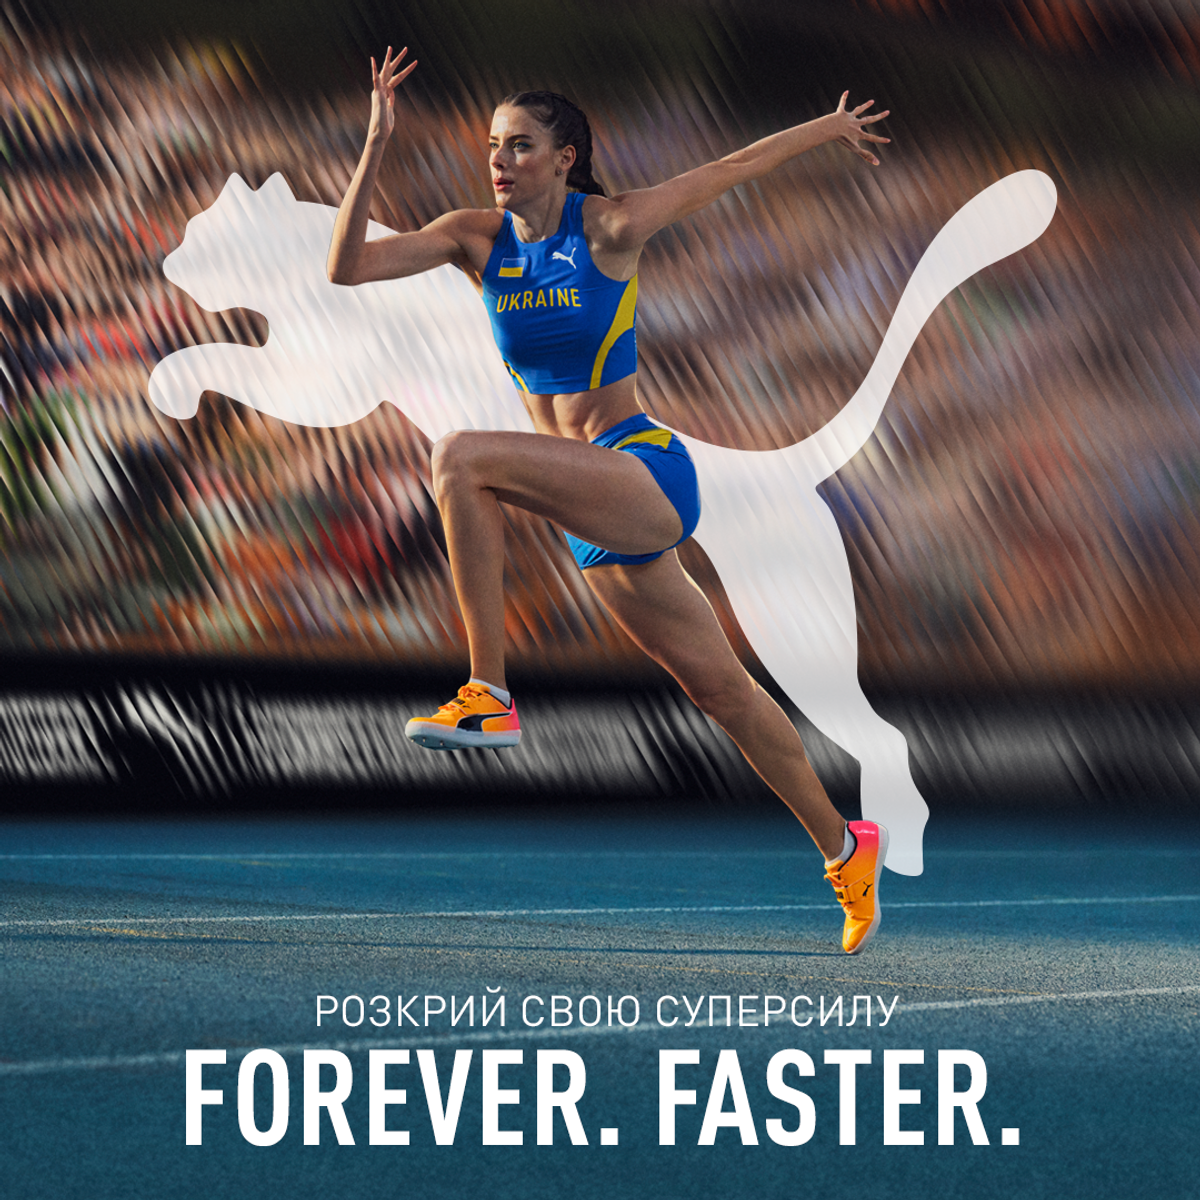 FOREVER.FASTER: REVEAL YOUR SUPER POWER